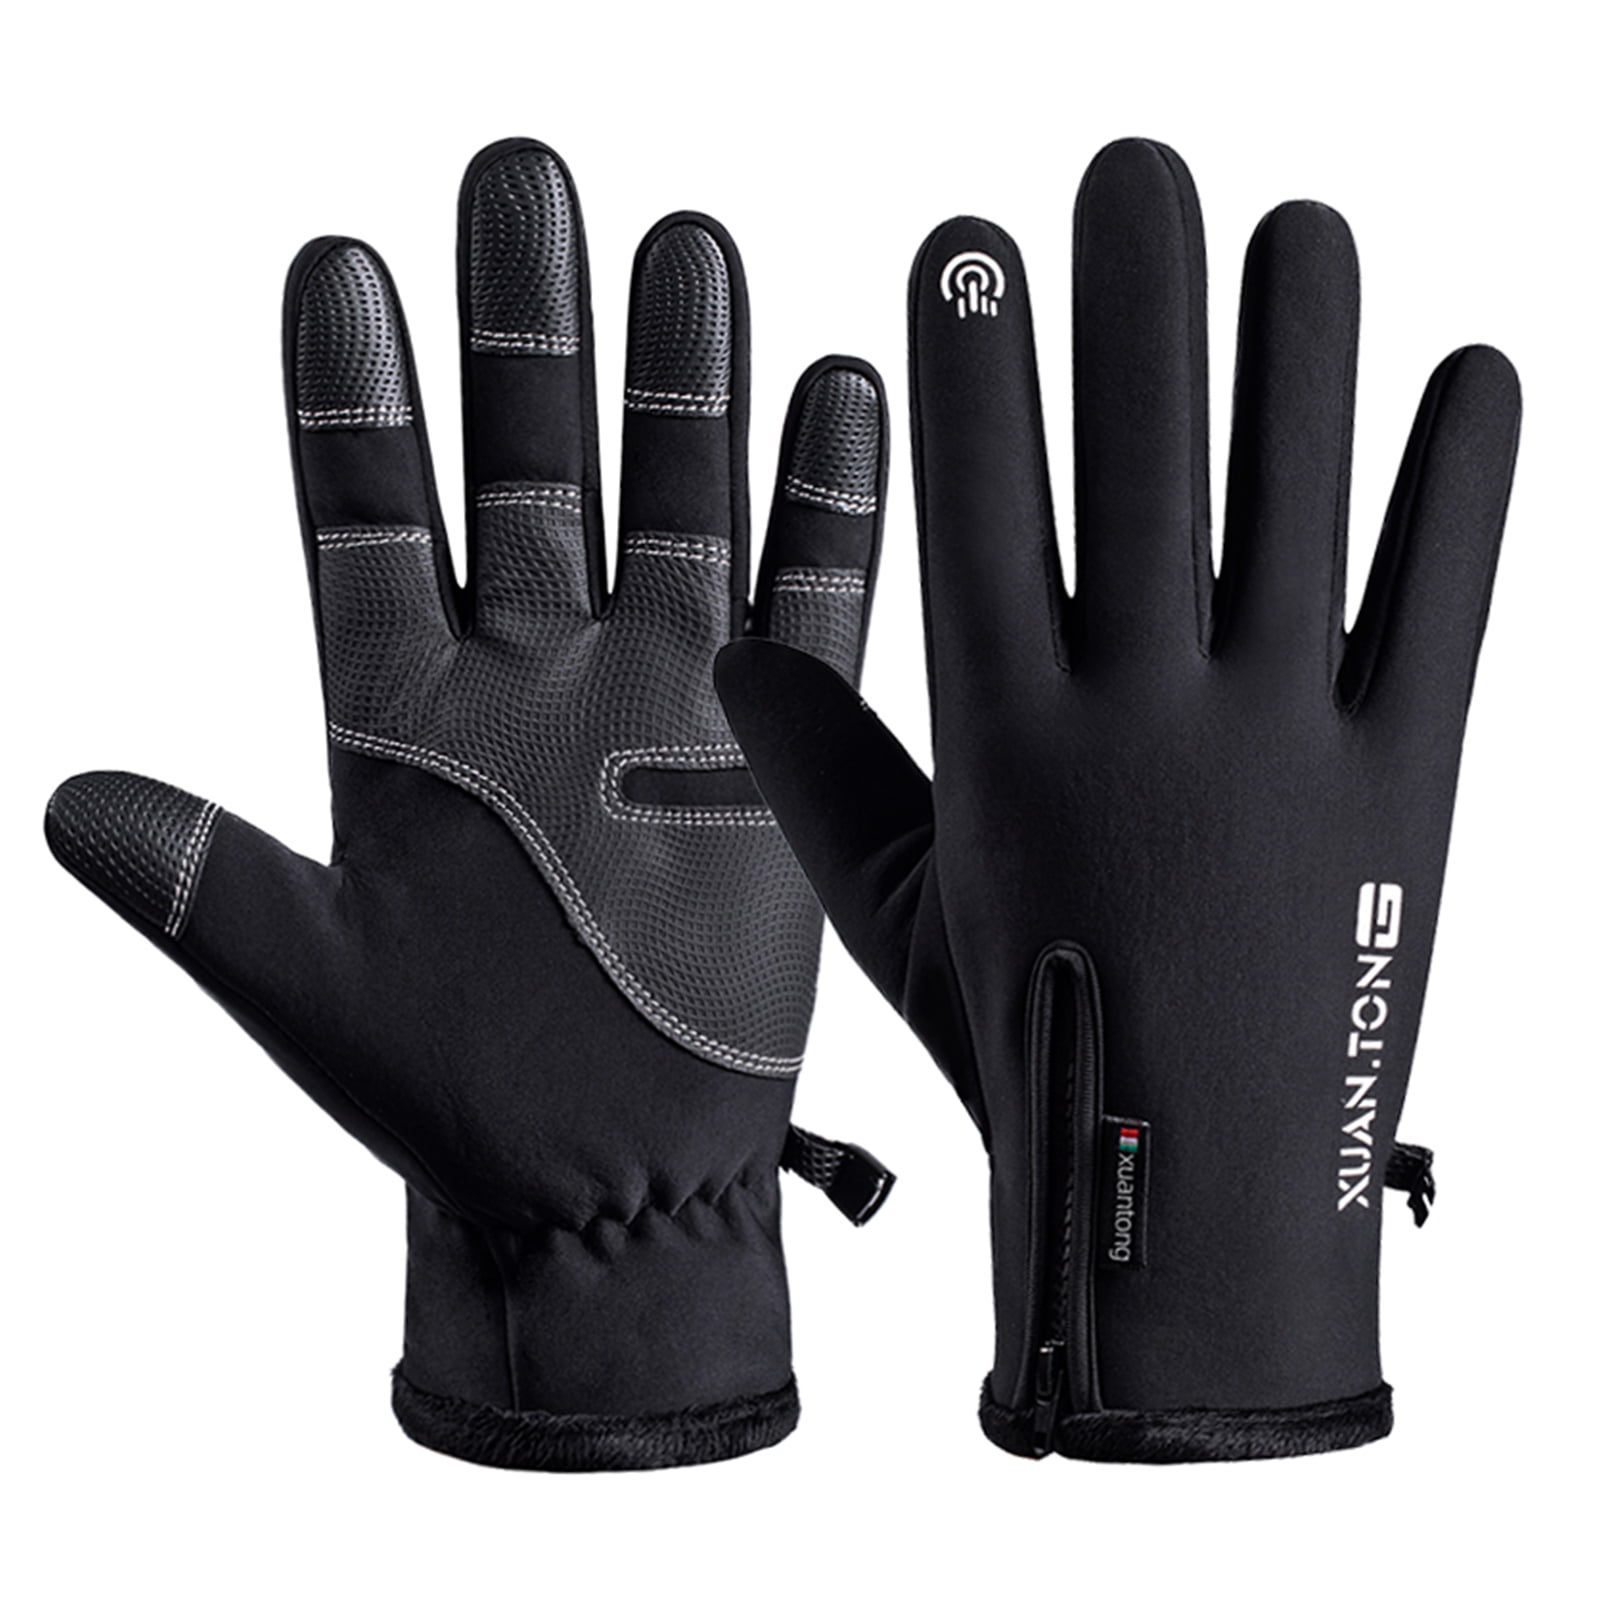 Wind-proof Waterproof Gloves Winter Touch Screen Ski Gloves Cycling Gloves Hot 